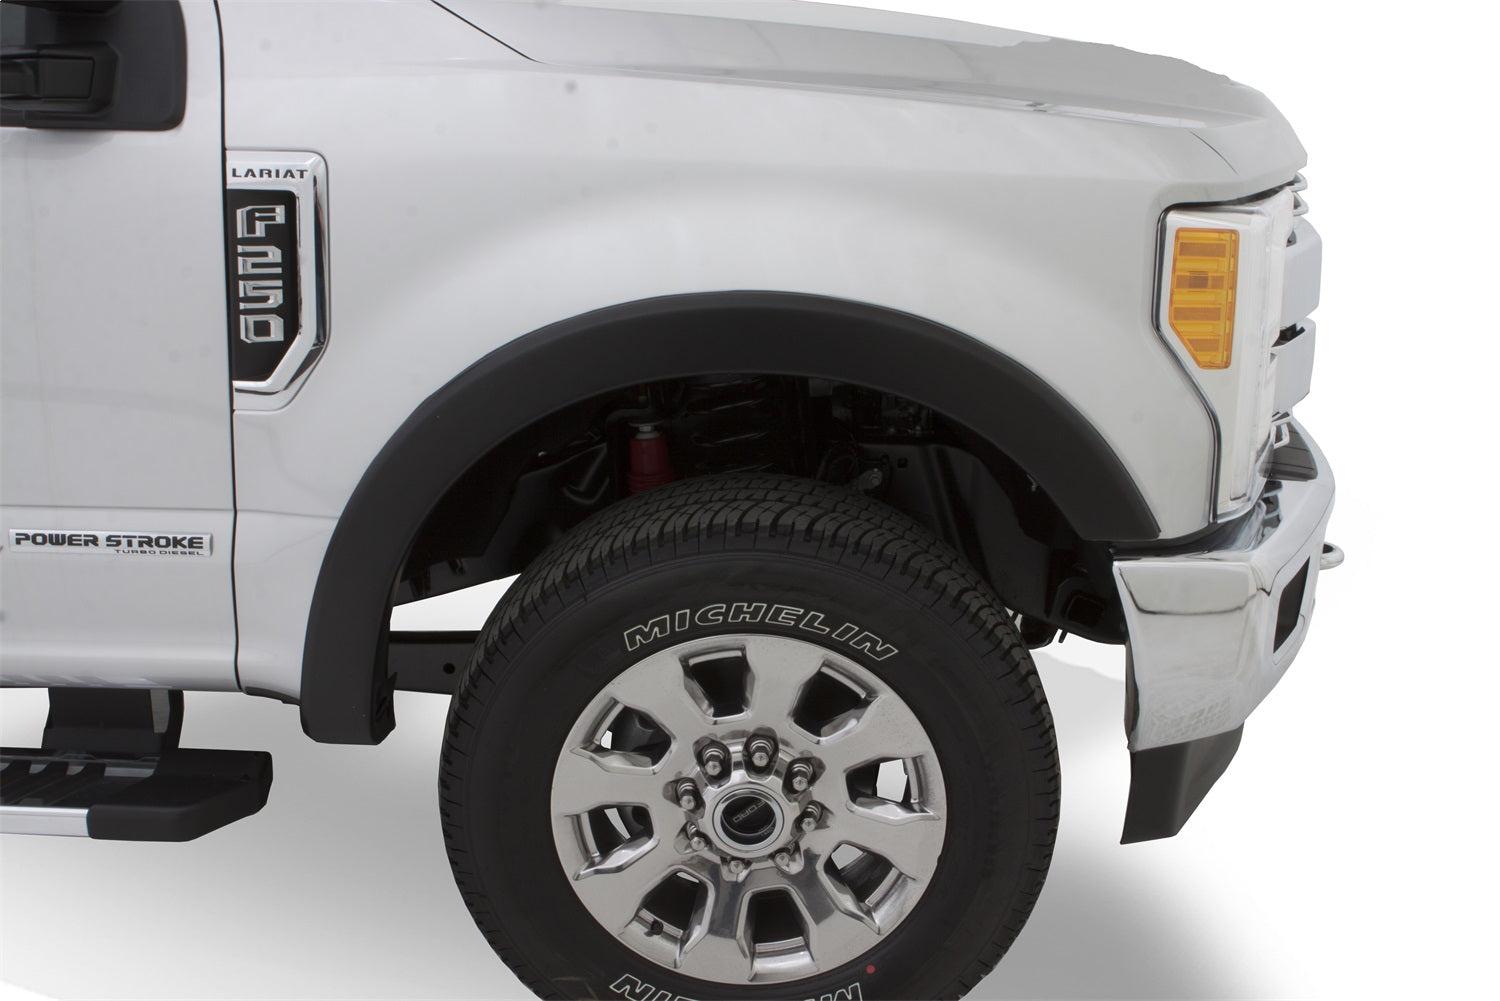 Bushwacker 20039-02 Black OE-Style Smooth Finish Front Fender Flares for 1999-2010 Ford F-250 Super Duty; 1999-2007 F-350 to F-550 Super Duty